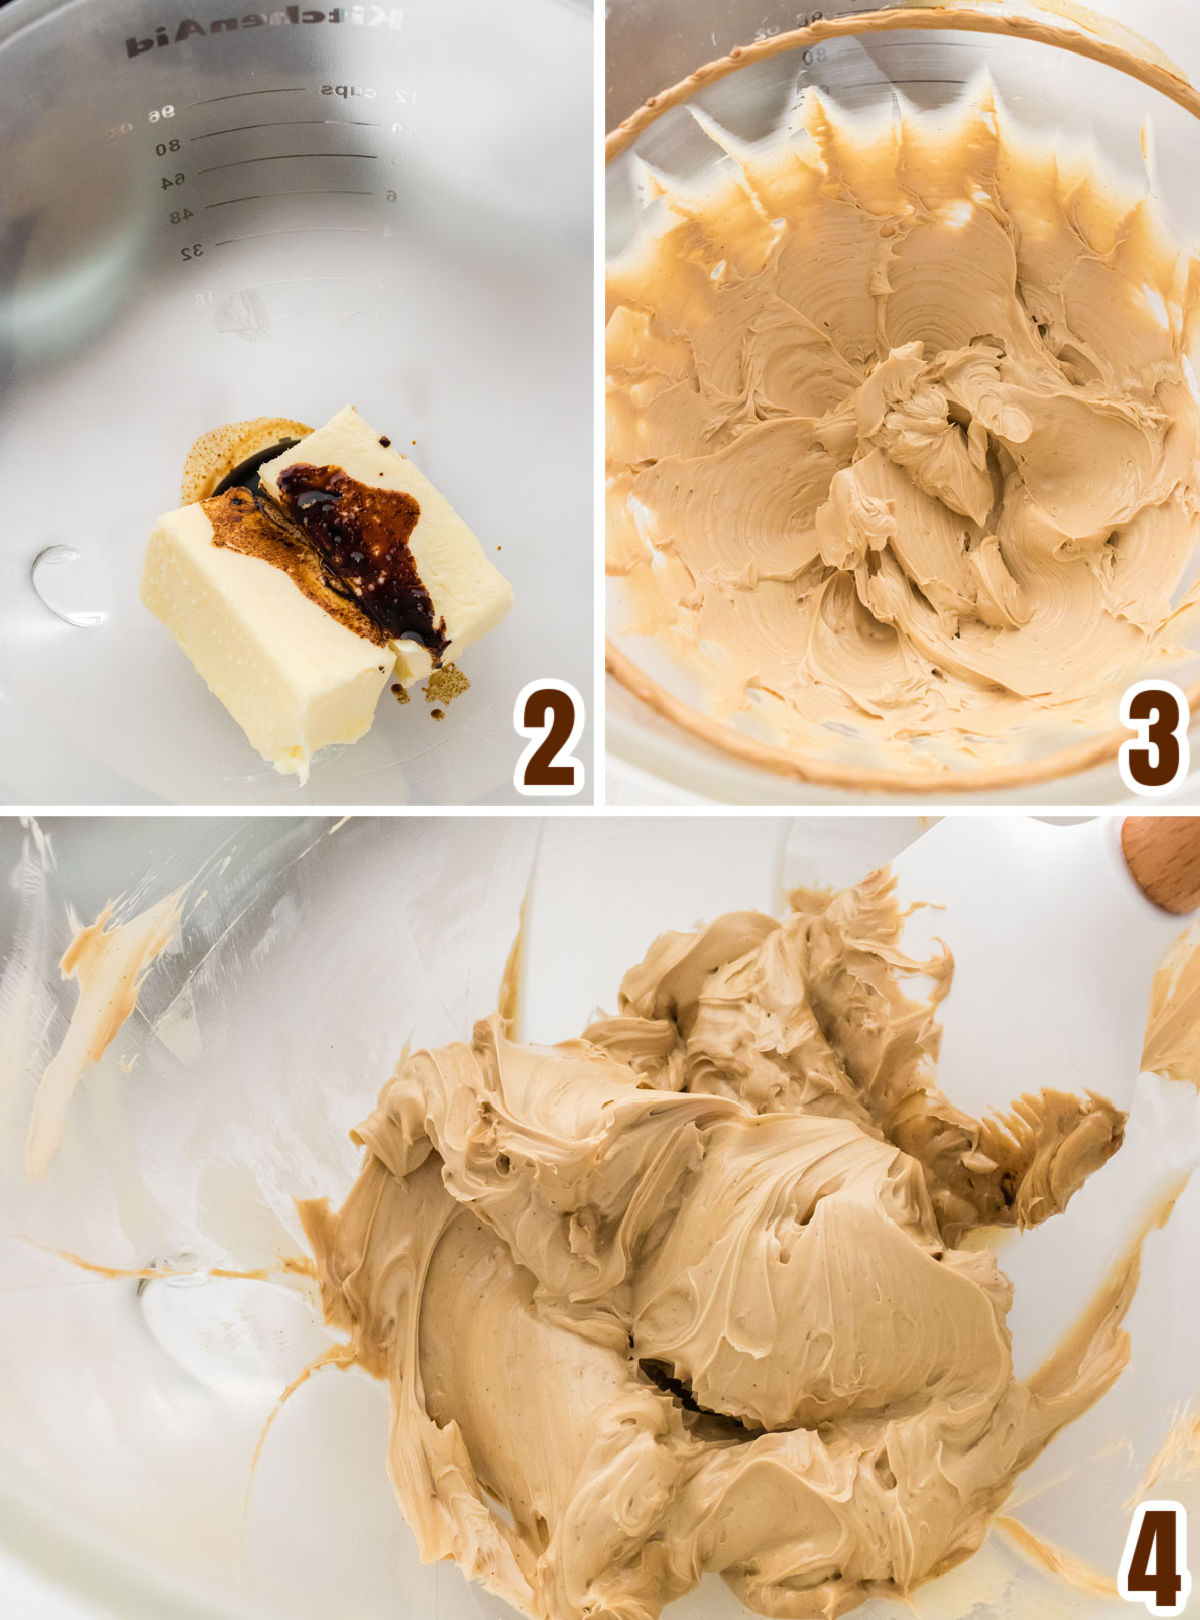 Collage image showing how to mix together the butter and the coffee mixture for the best flavored frosting.